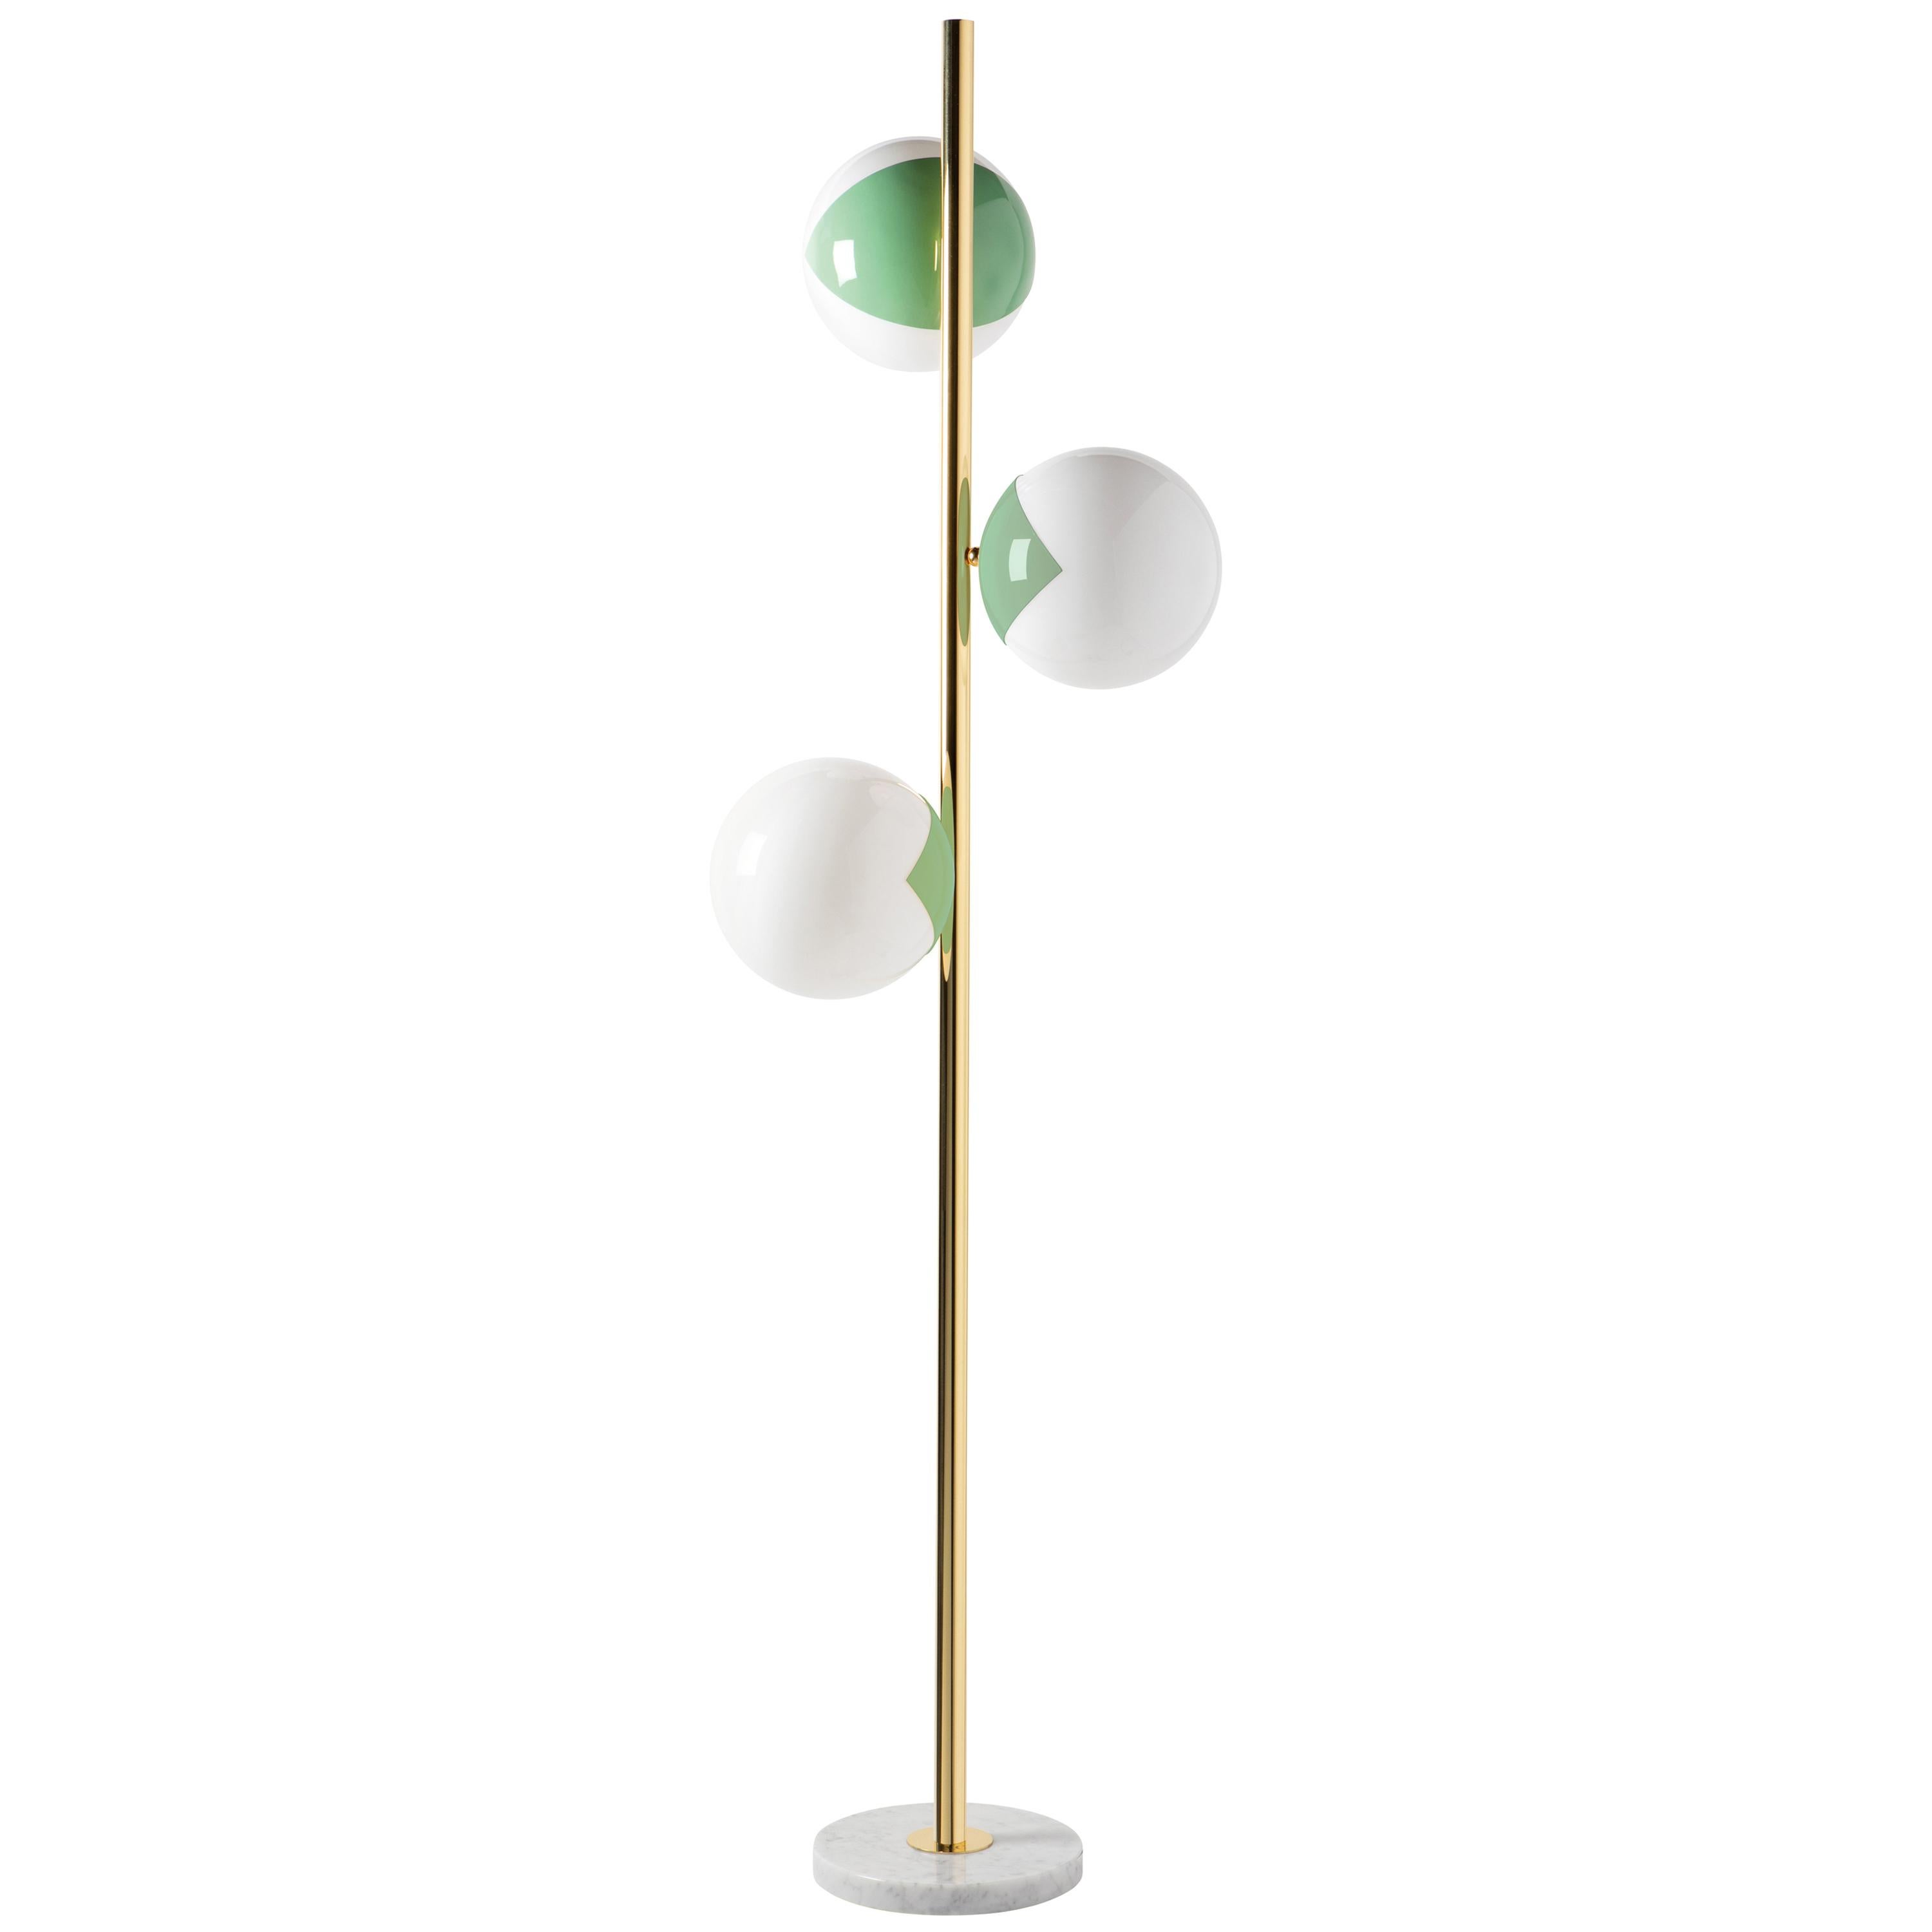 Set of 2 pop up floor lamp by Magic Circus Editions
Dimensions: W 170 x H 51 cm
 diam sphere 22 cm
Materials: Carrara marble base, smooth brass tube, glossy mouth blown glass

Available finishes: Matte black tube and brass, matte black tube and